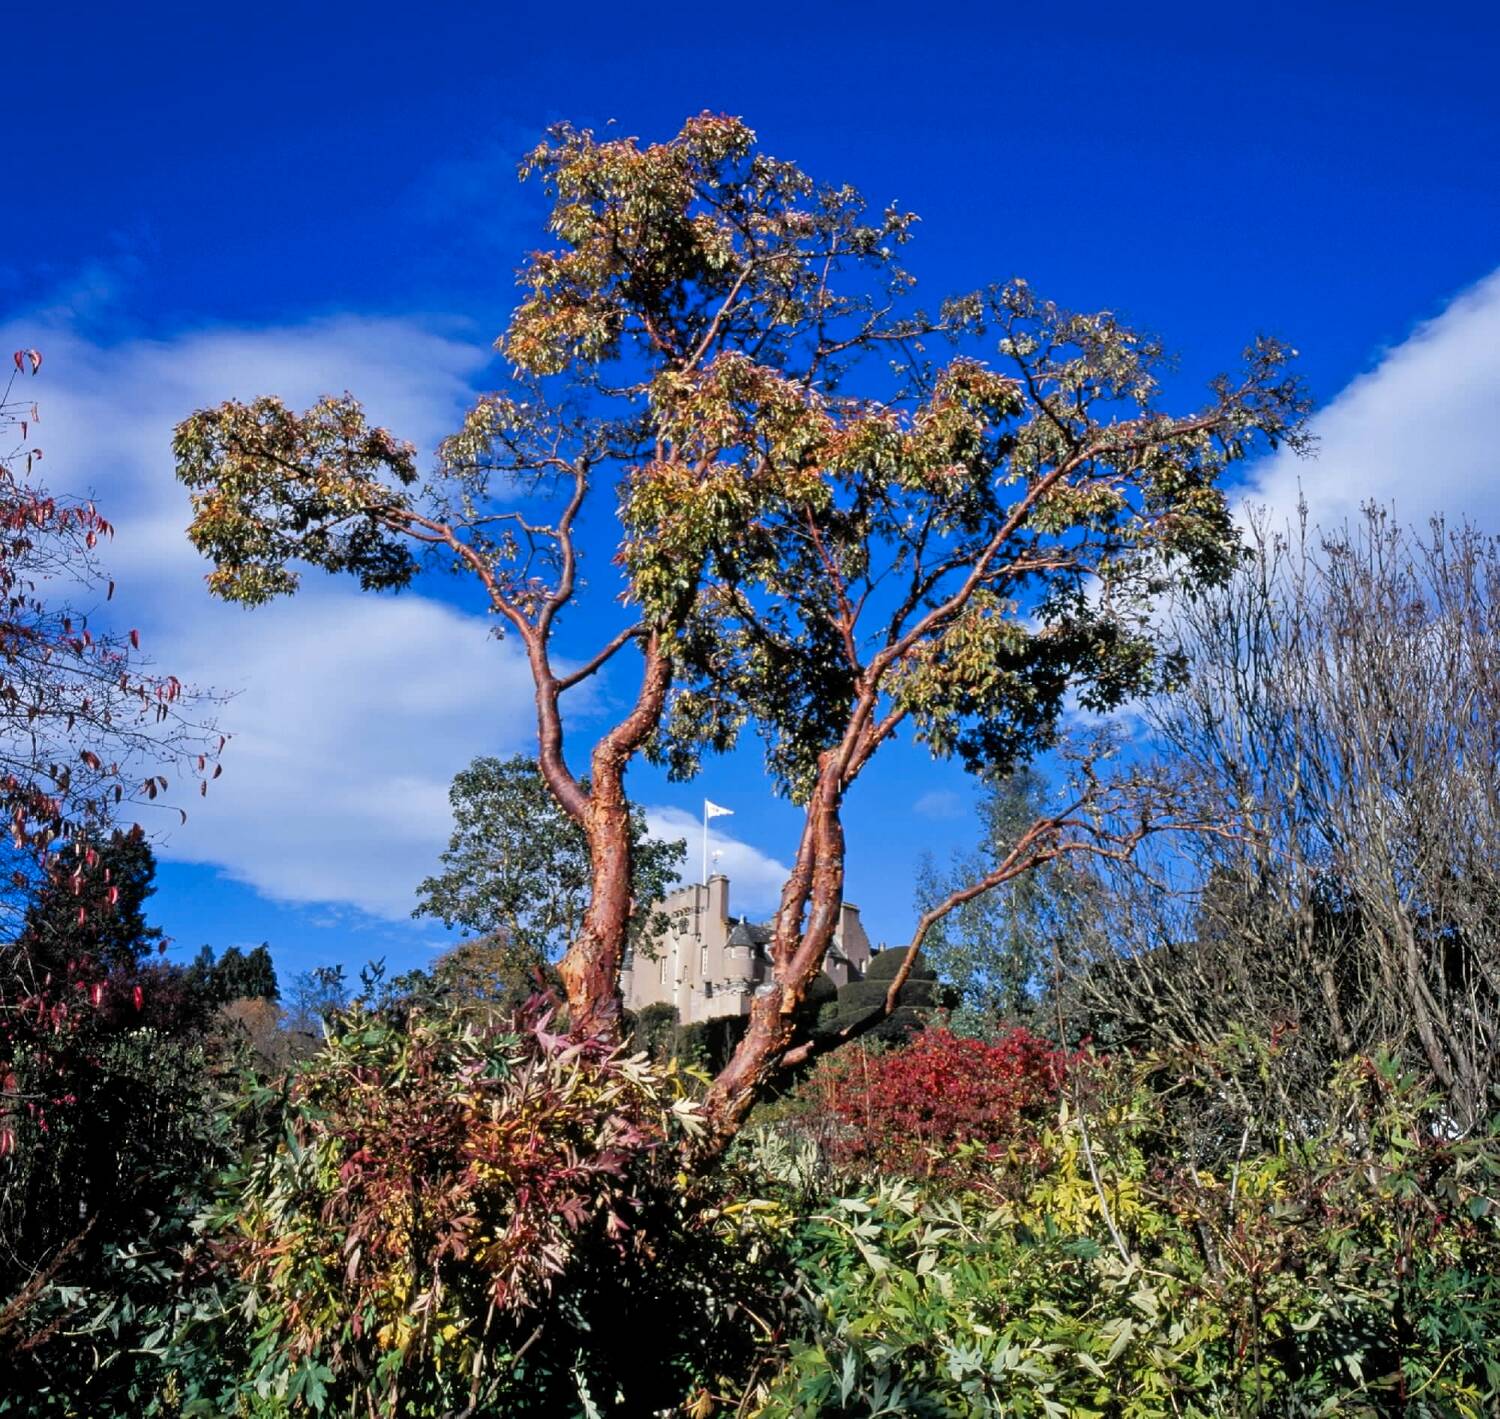 A colour photo of a red-barked tree growing out from a garden bed, with Crathes Castle in the distance. The sky is a very deep blue.